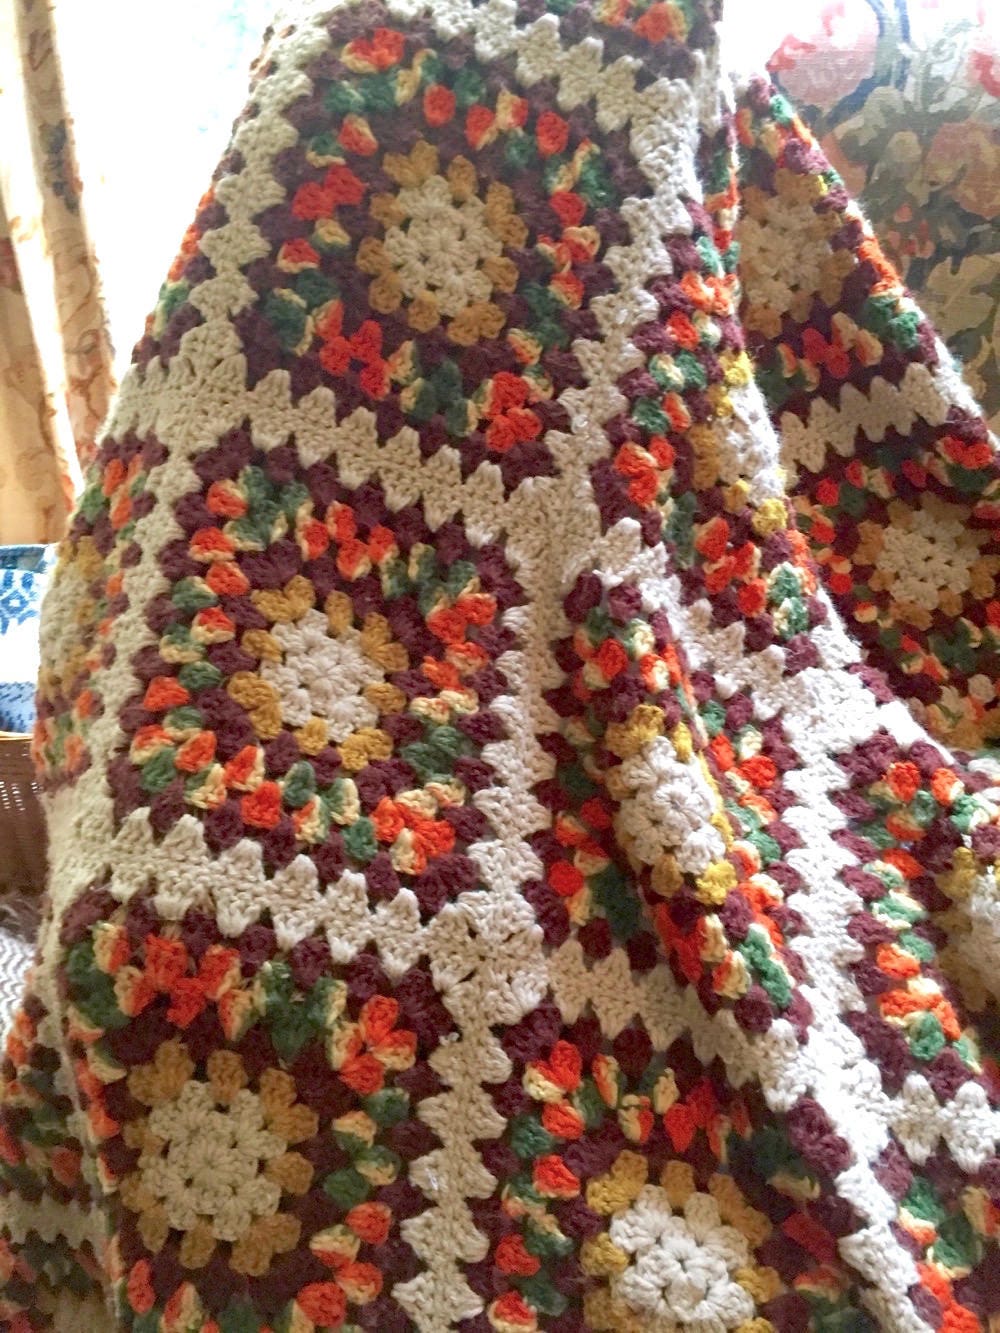 Granny Square Afghan Throw, Crochet Lap Blanket, Fall Autumn Colors